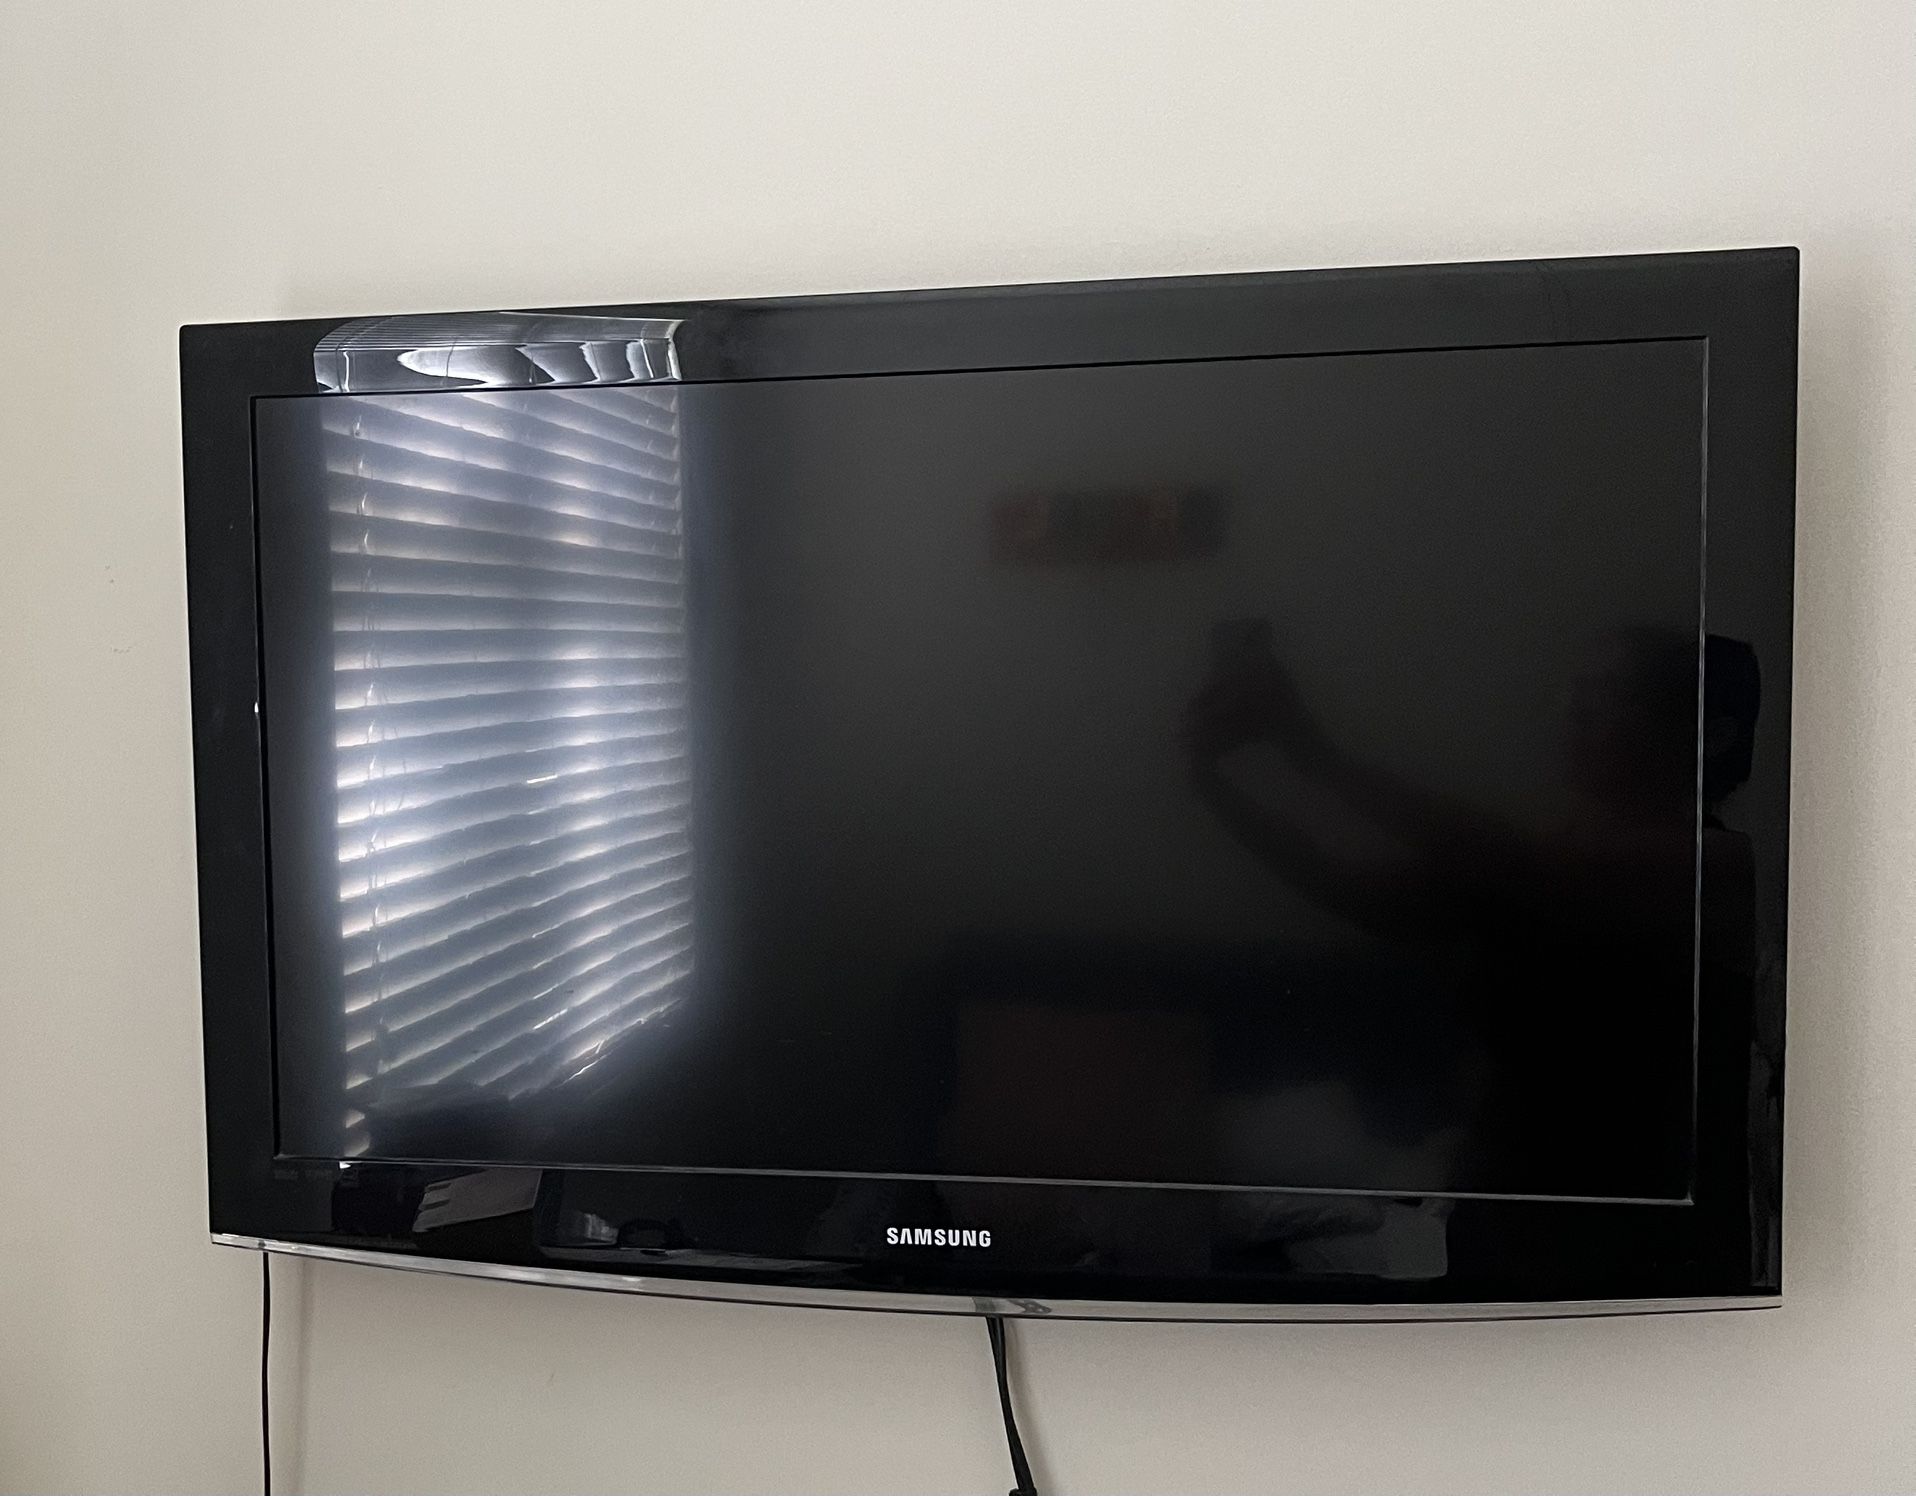 Samsung TV, 40” With Wall Mount (not Smart Tv)